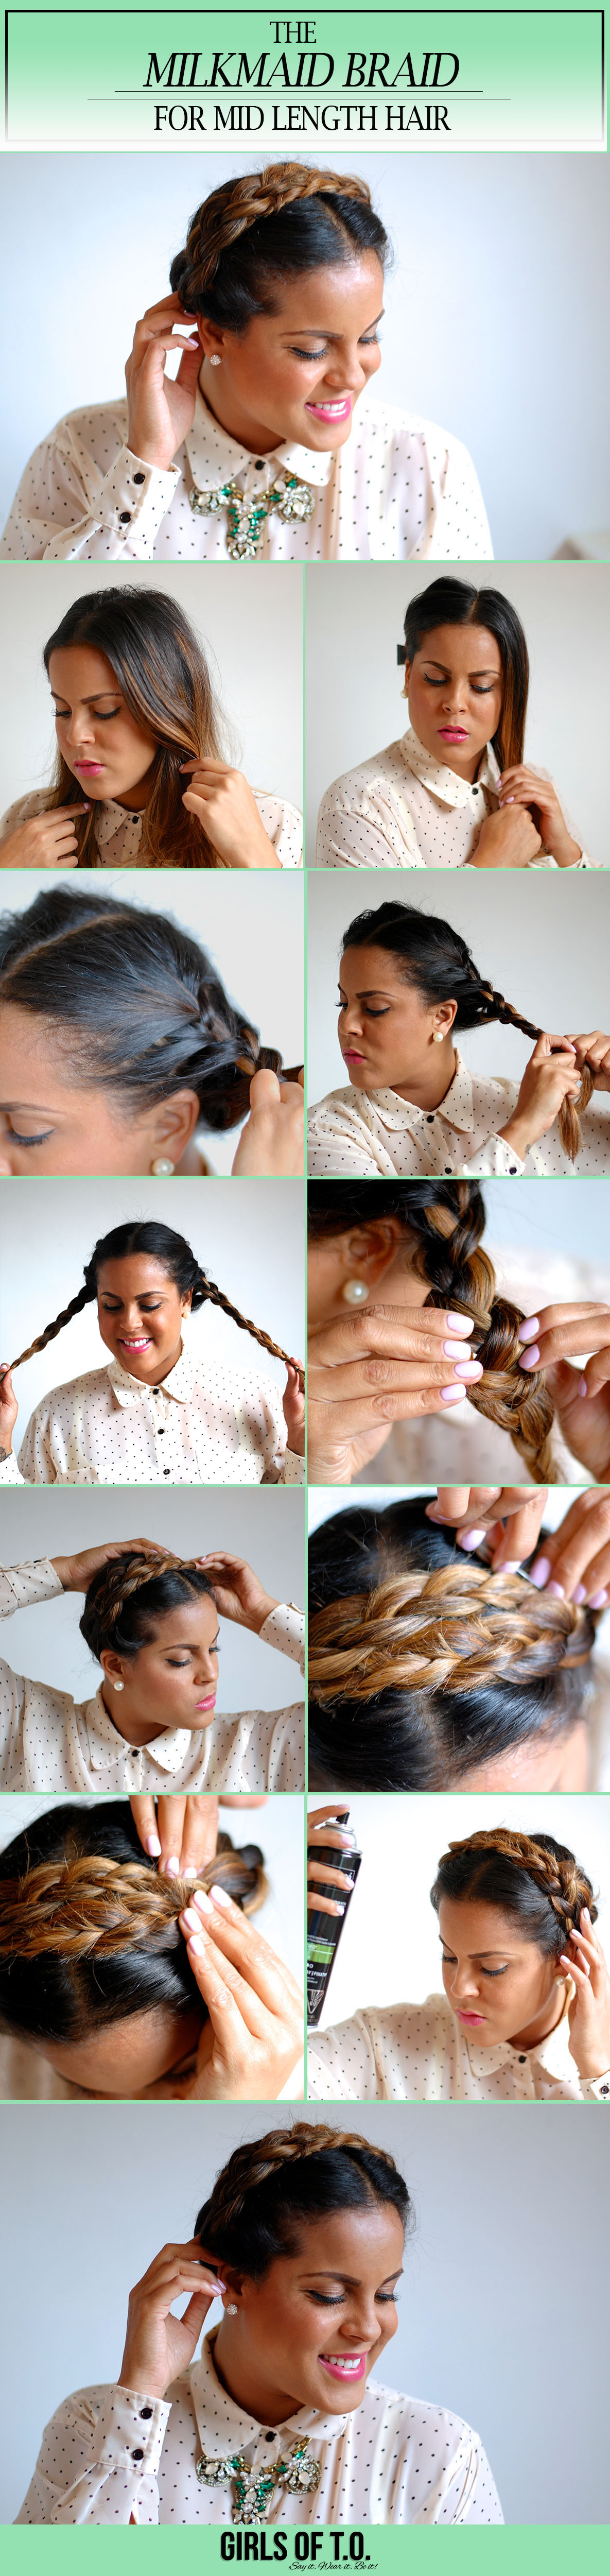 GOTO Beauty: The Milkmaid Braid For Mid Length Hair - Girls Of .